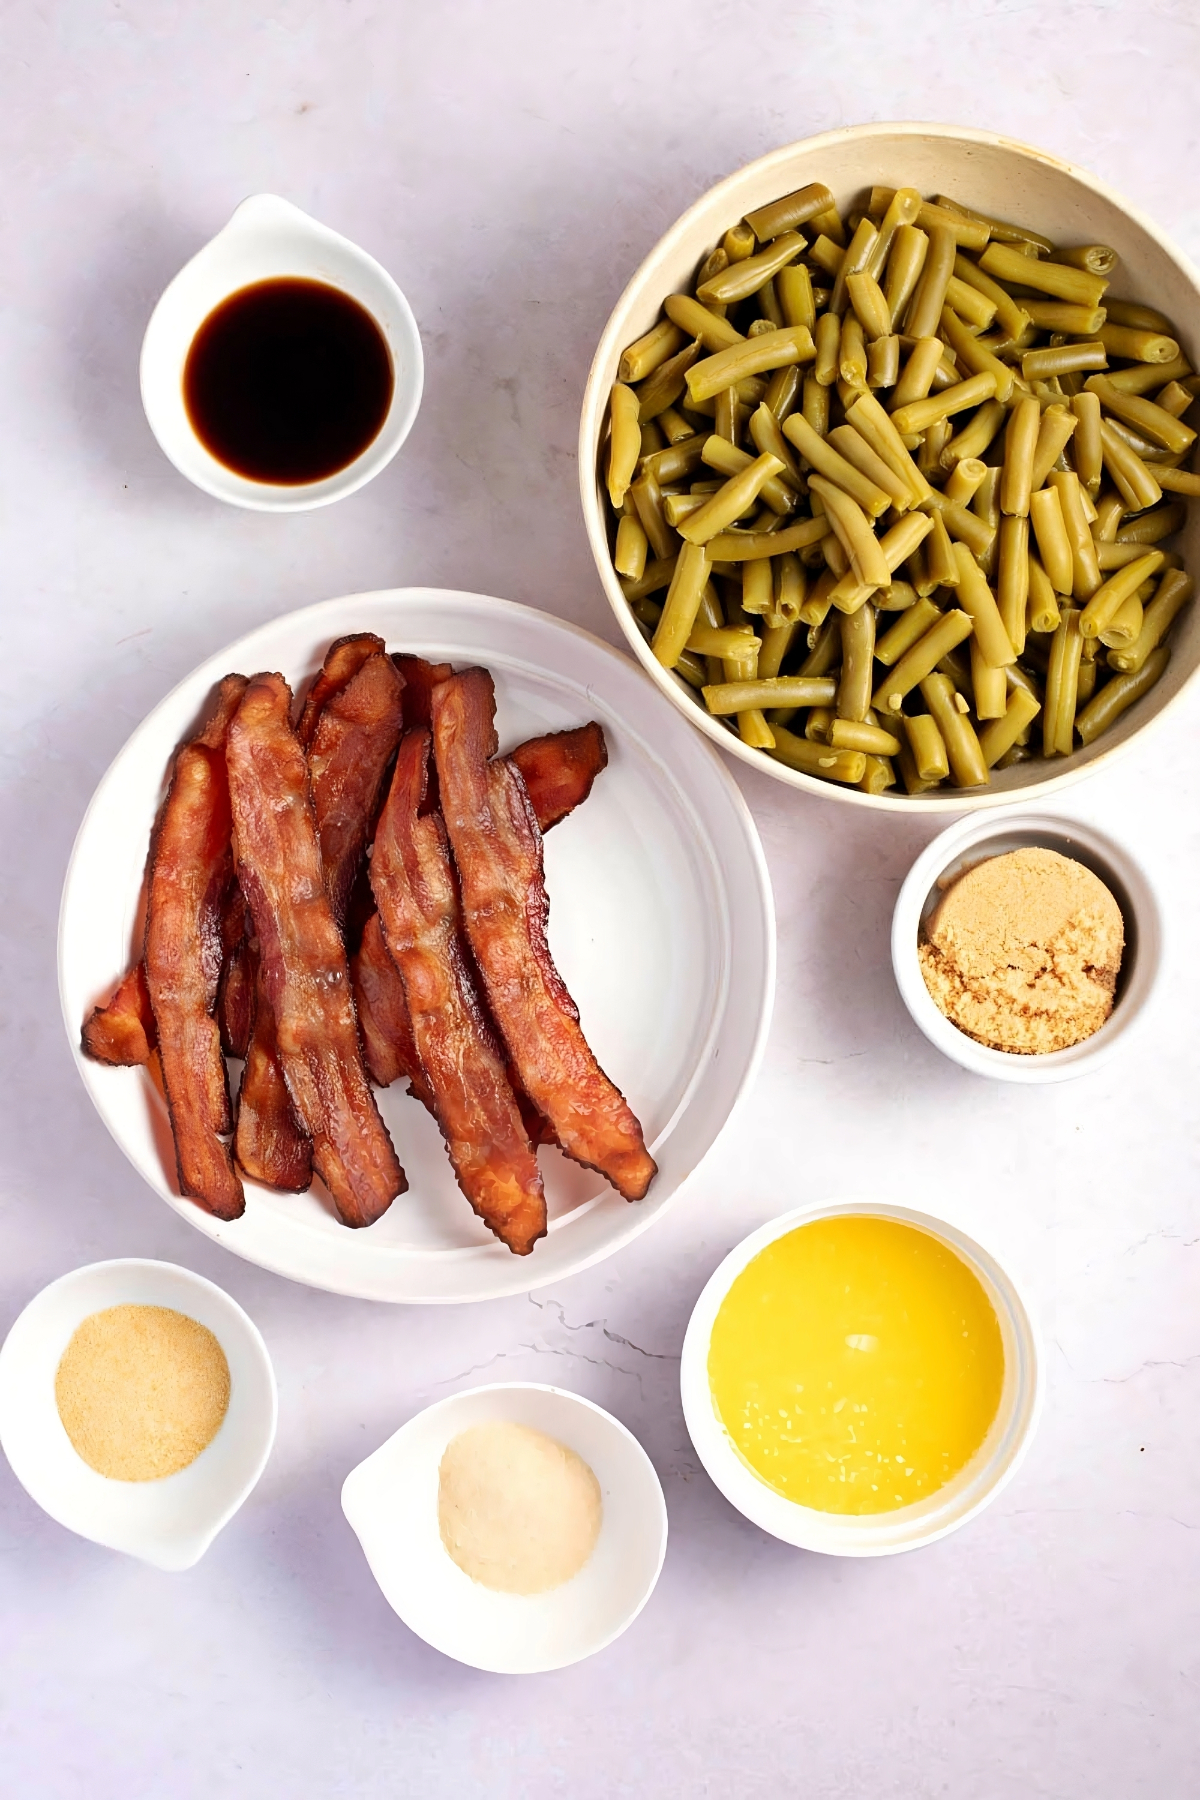 Crack Green Beans Ingredients - Green Beans, Bacon, Butter, Seasonings, Brown Sugar and Soy Sauce